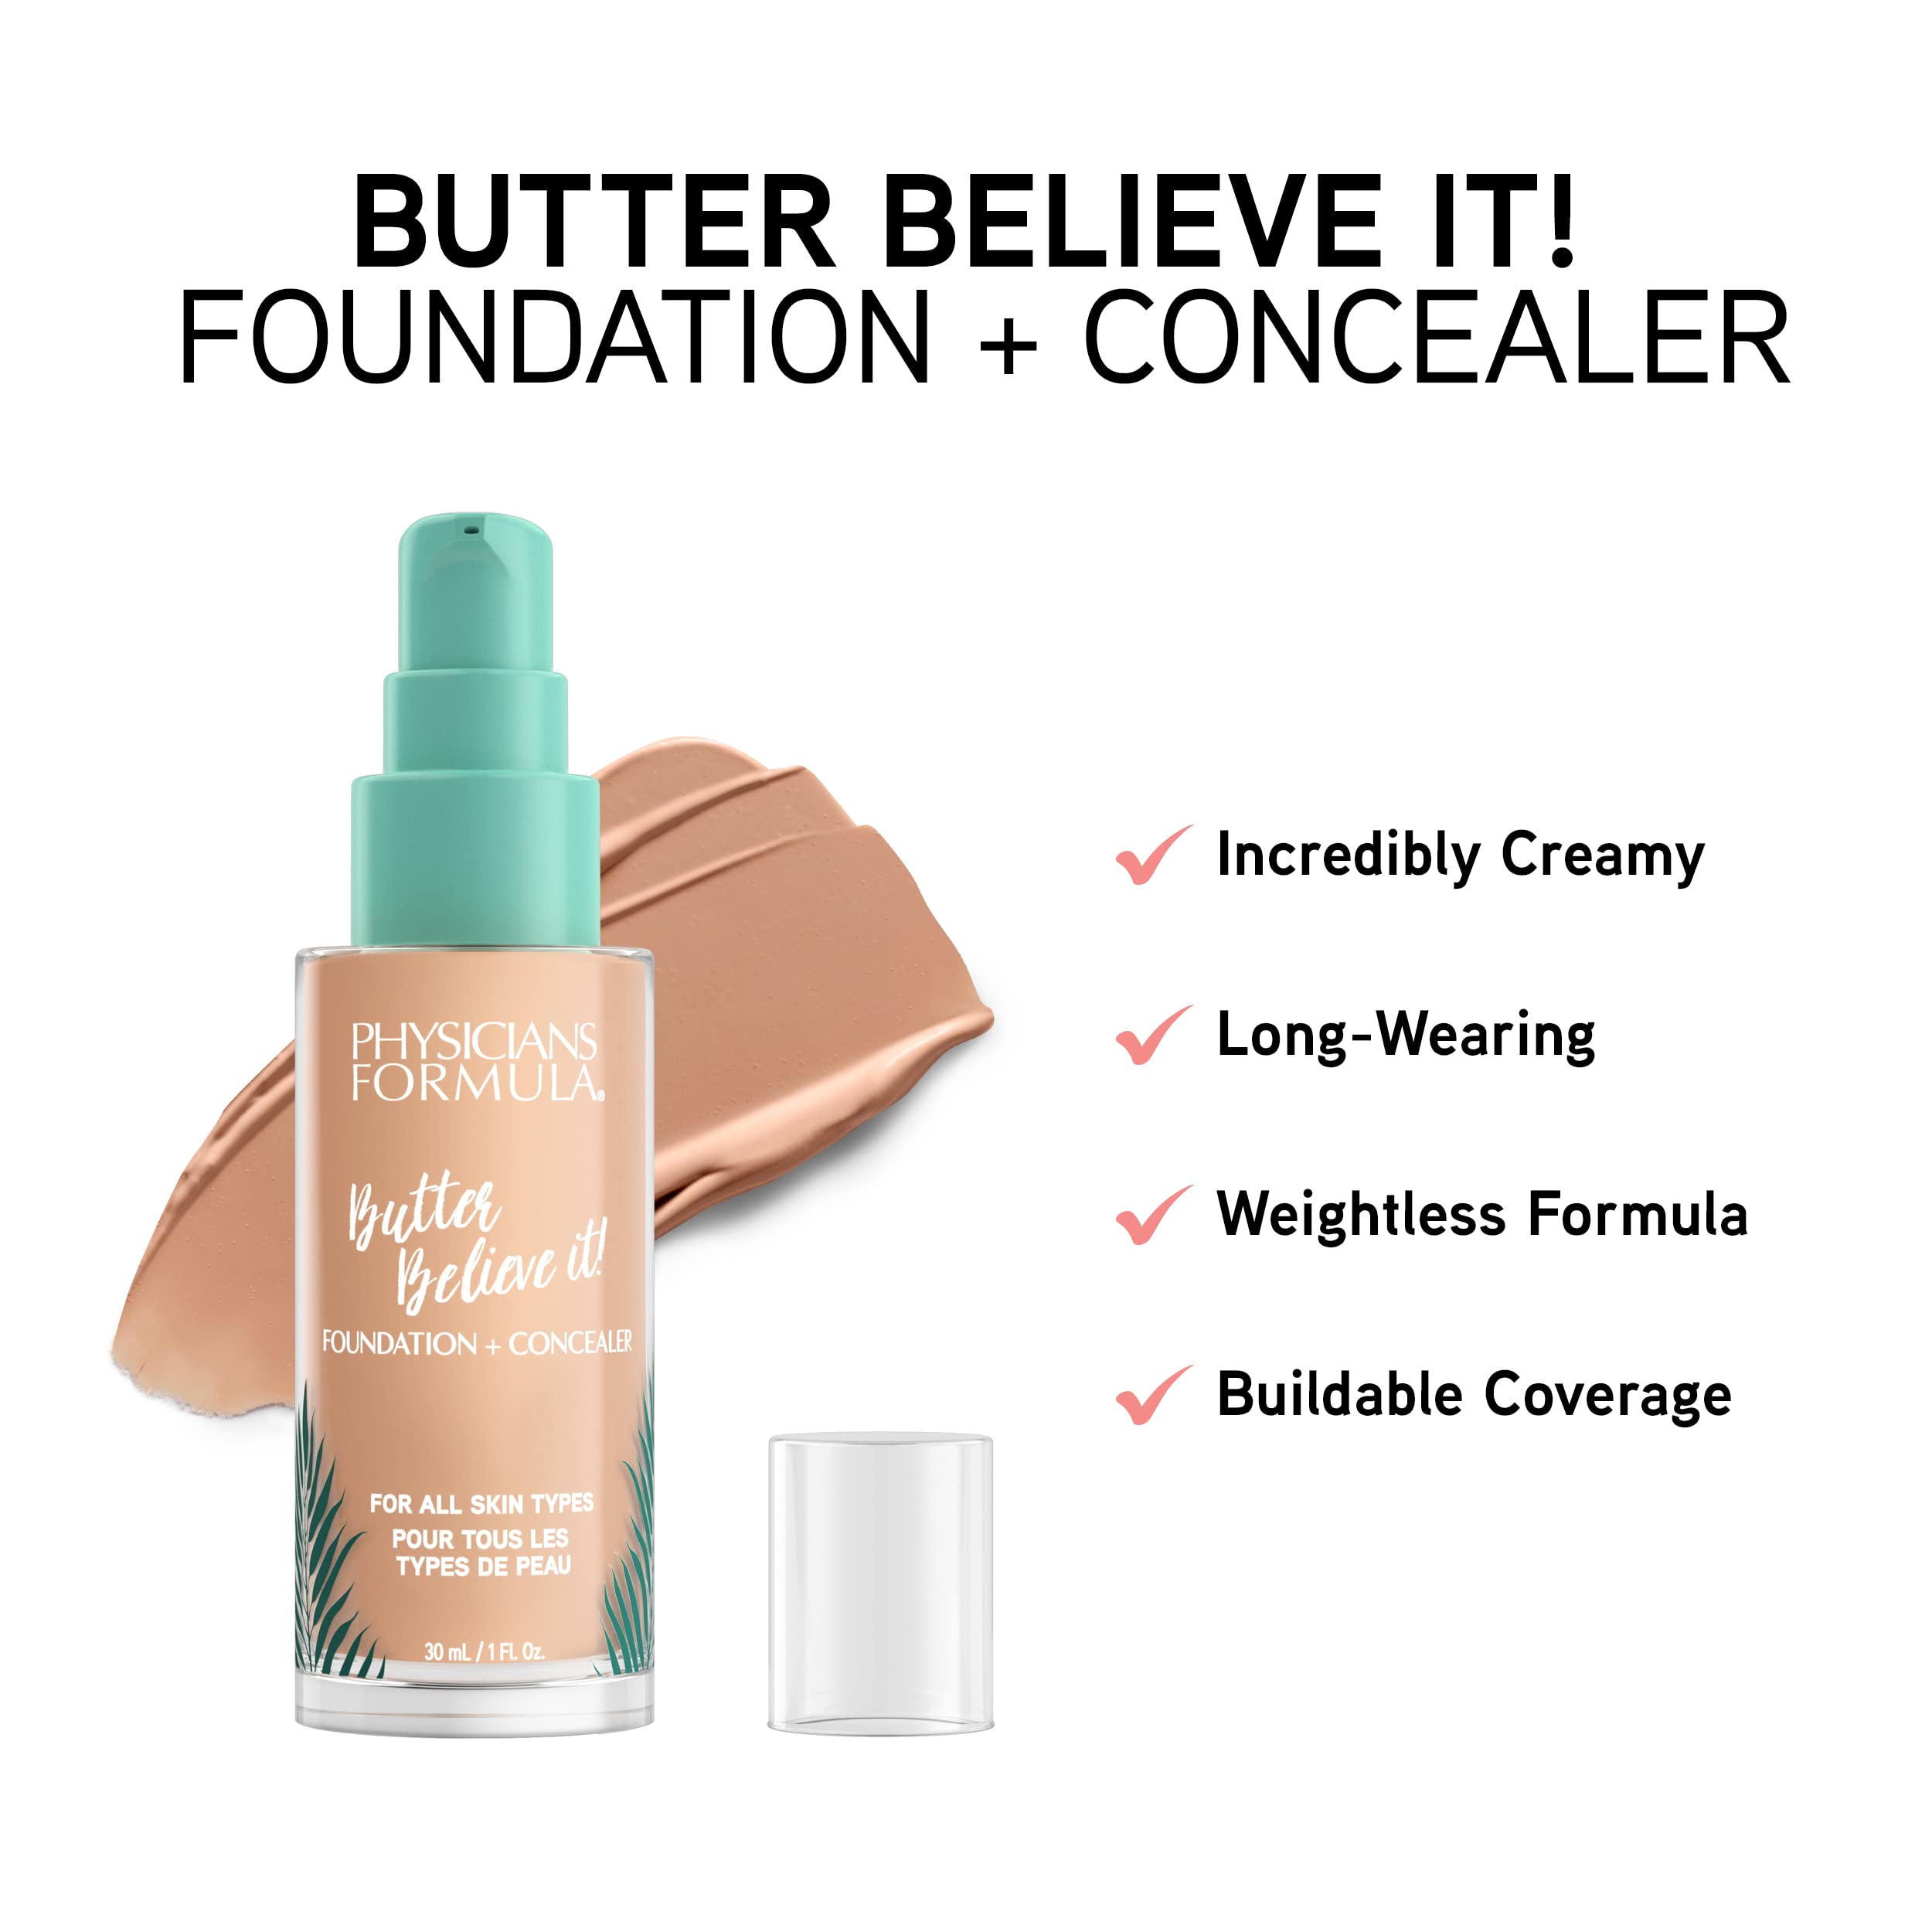 Physicians Formula Butter Believe It! Foundation + Concealer 1- Fair | Dermatologist Tested, Clinicially Tested